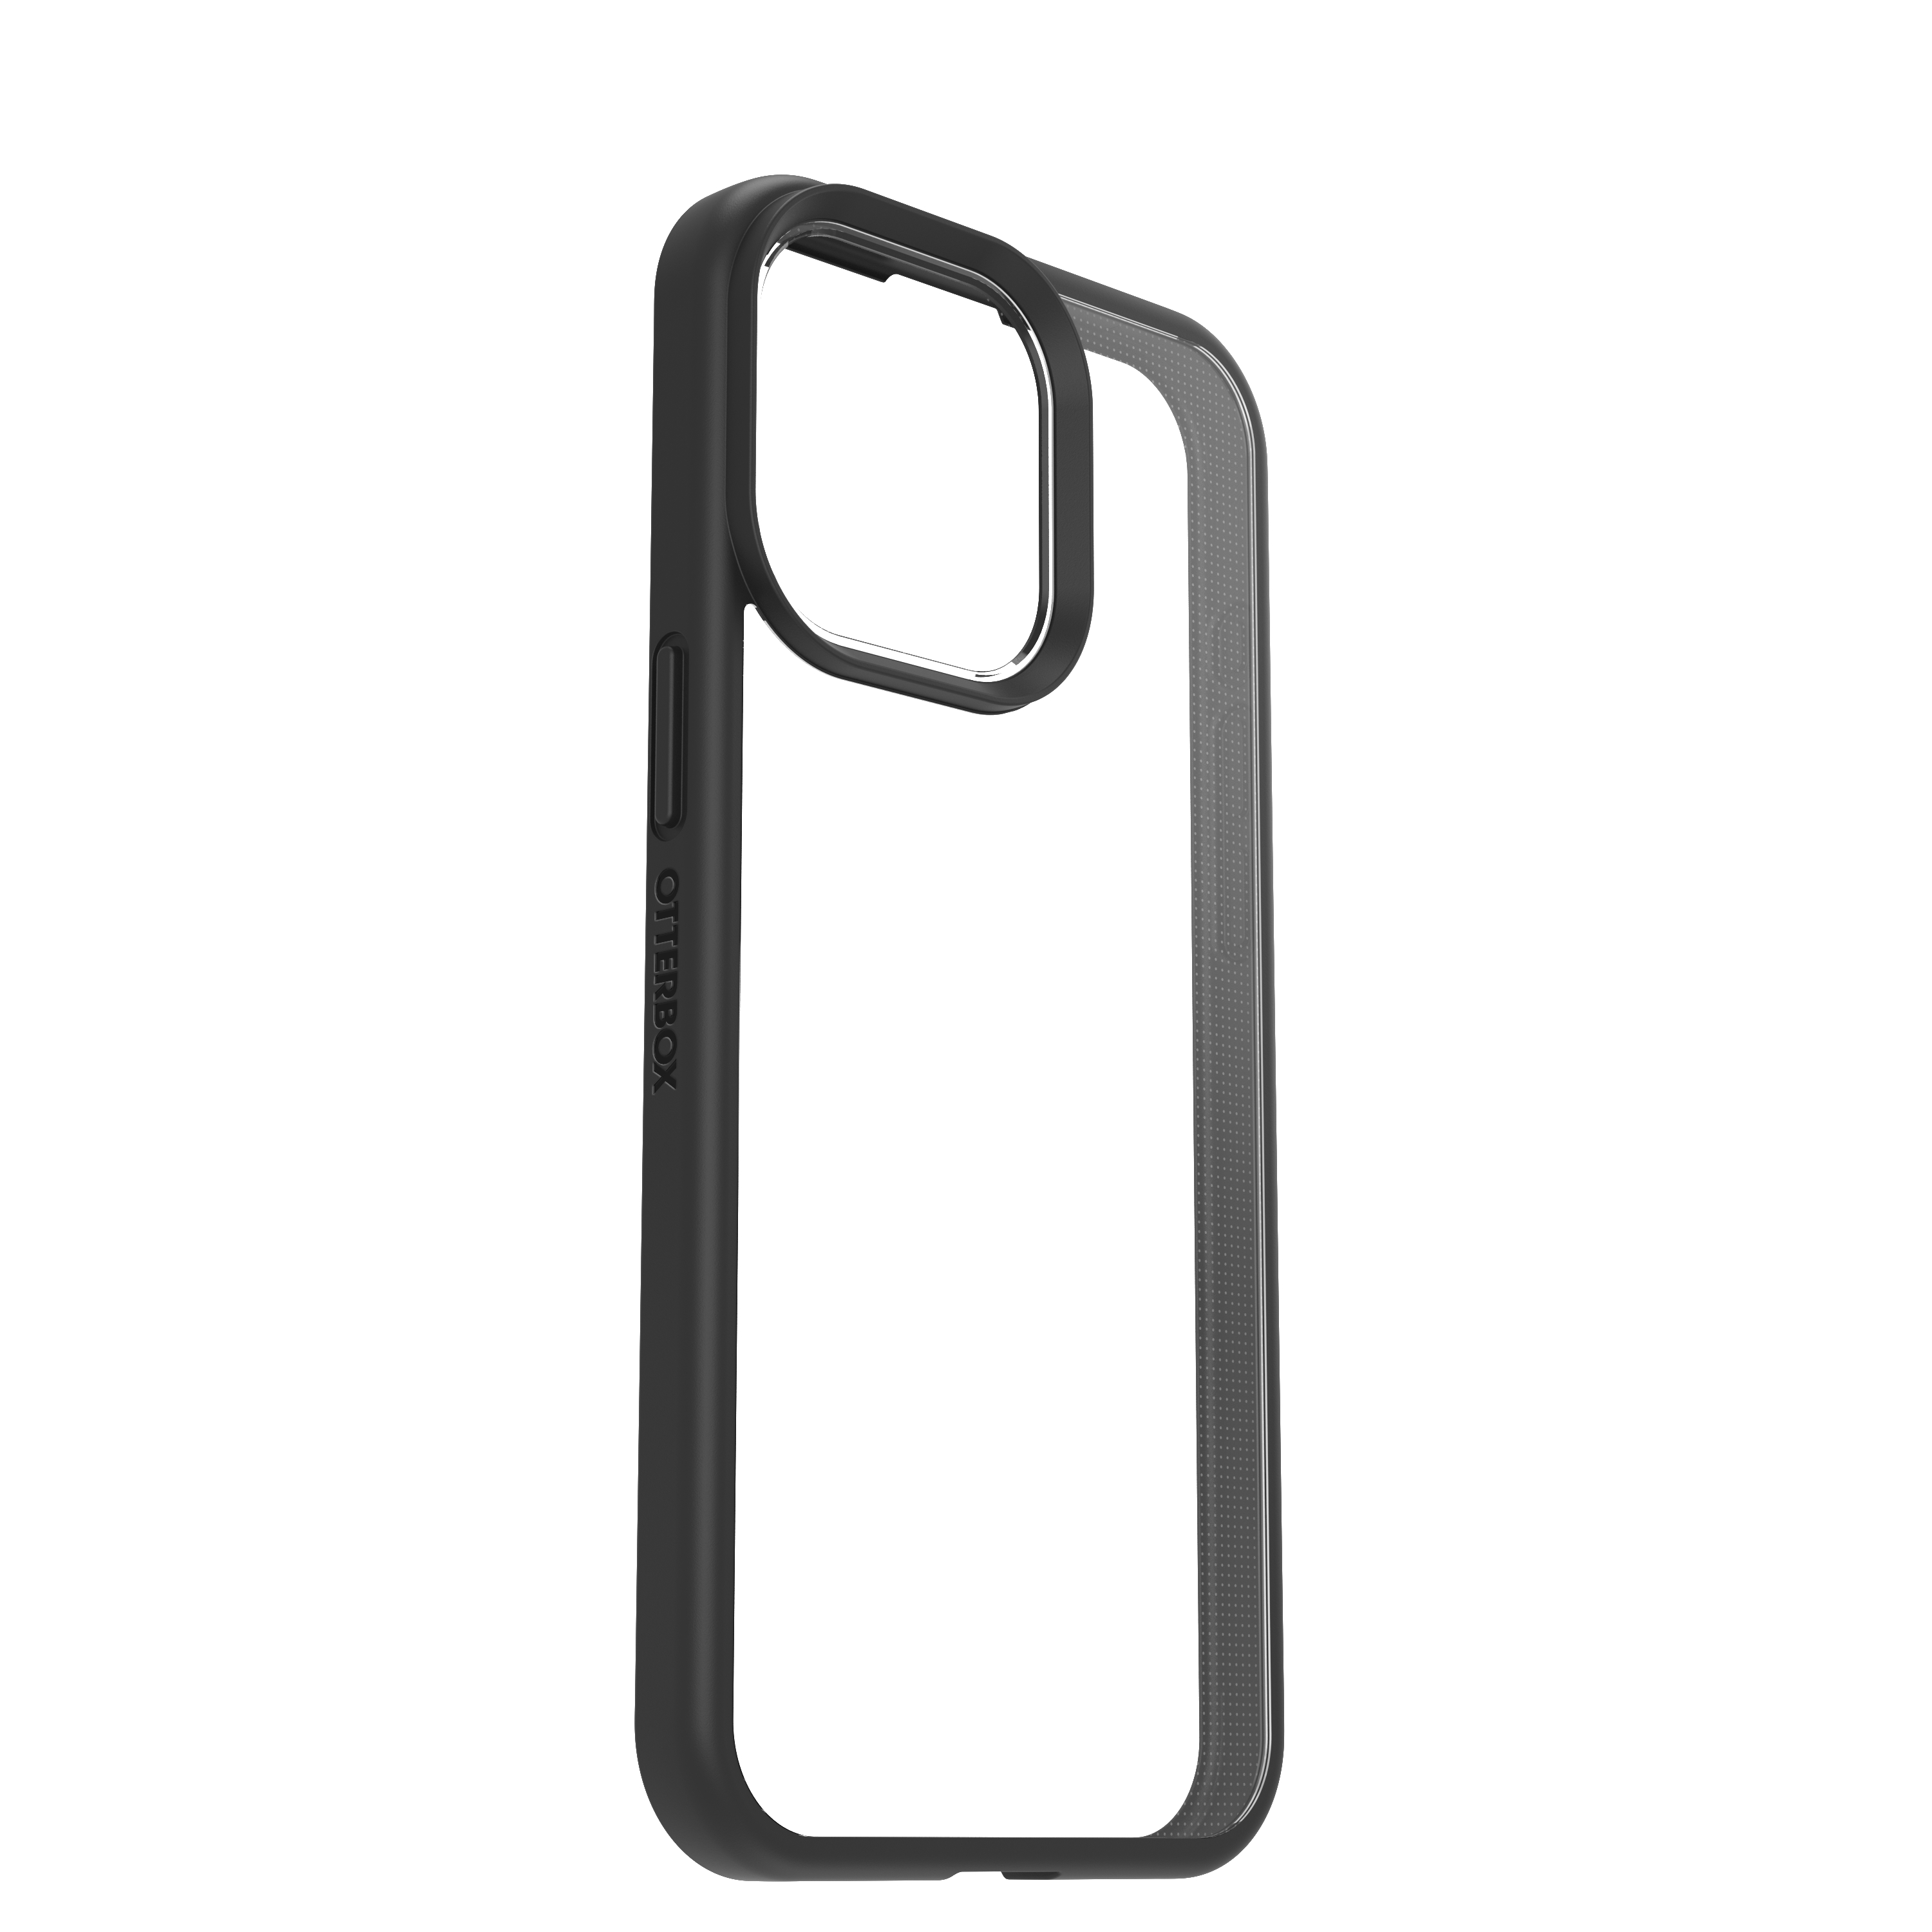 Transparent/Schwarz OTTERBOX iPhone Max, React, Pro Backcover, Apple, 15